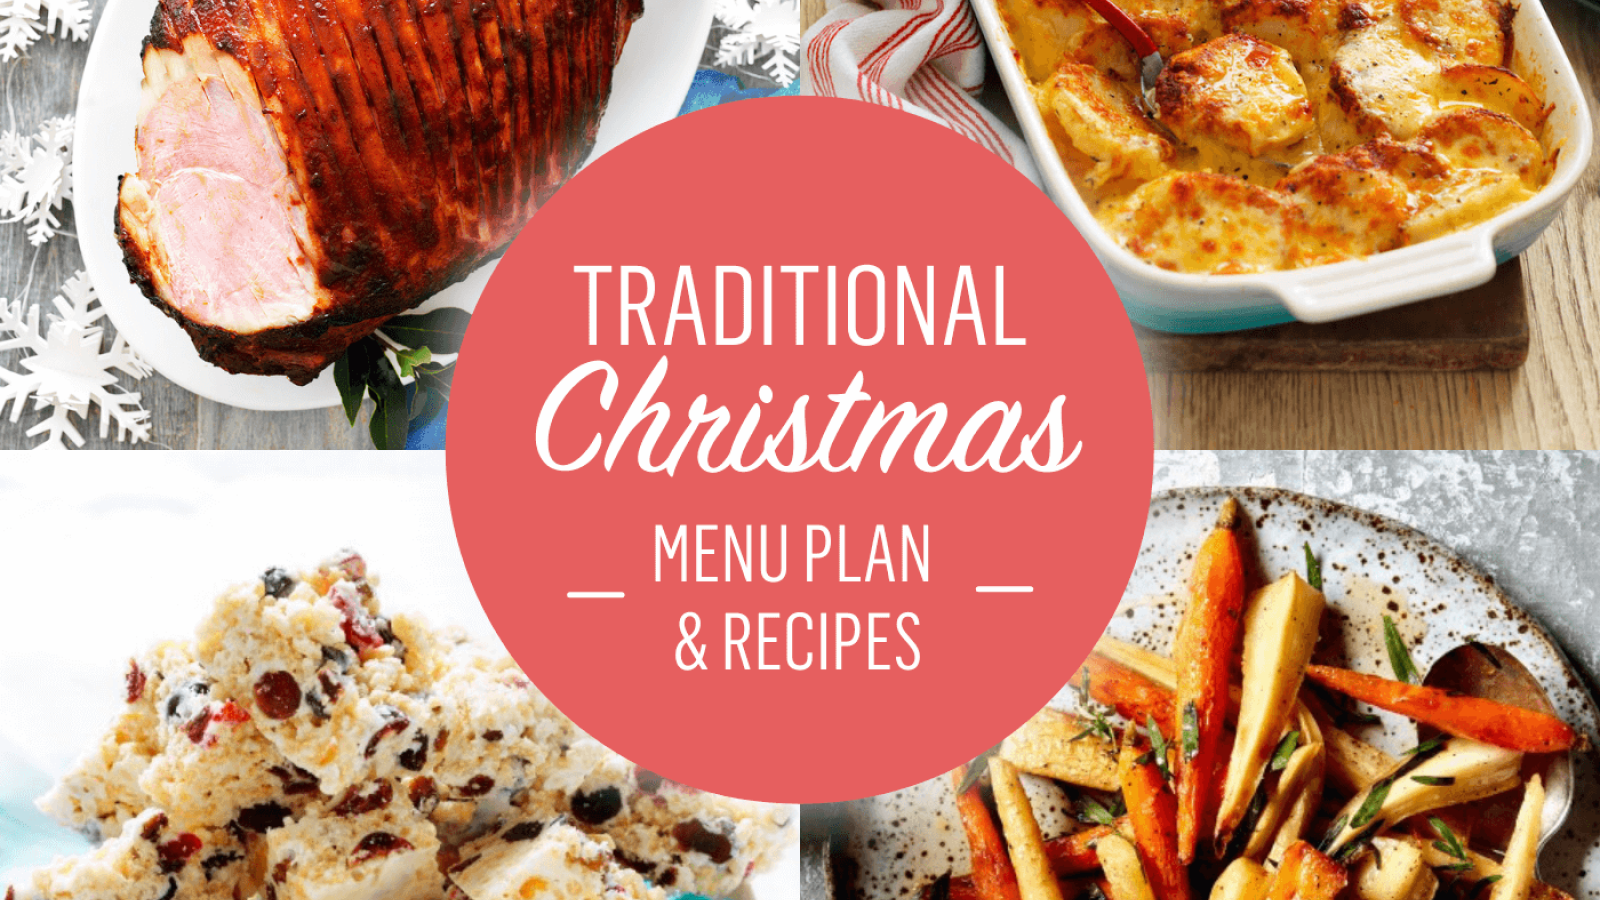 https://myfoodbook.com.au/sites/default/files/styles/16x9/public/collections_image/traditional%20christmas%20menu%20plan%202021_0.png